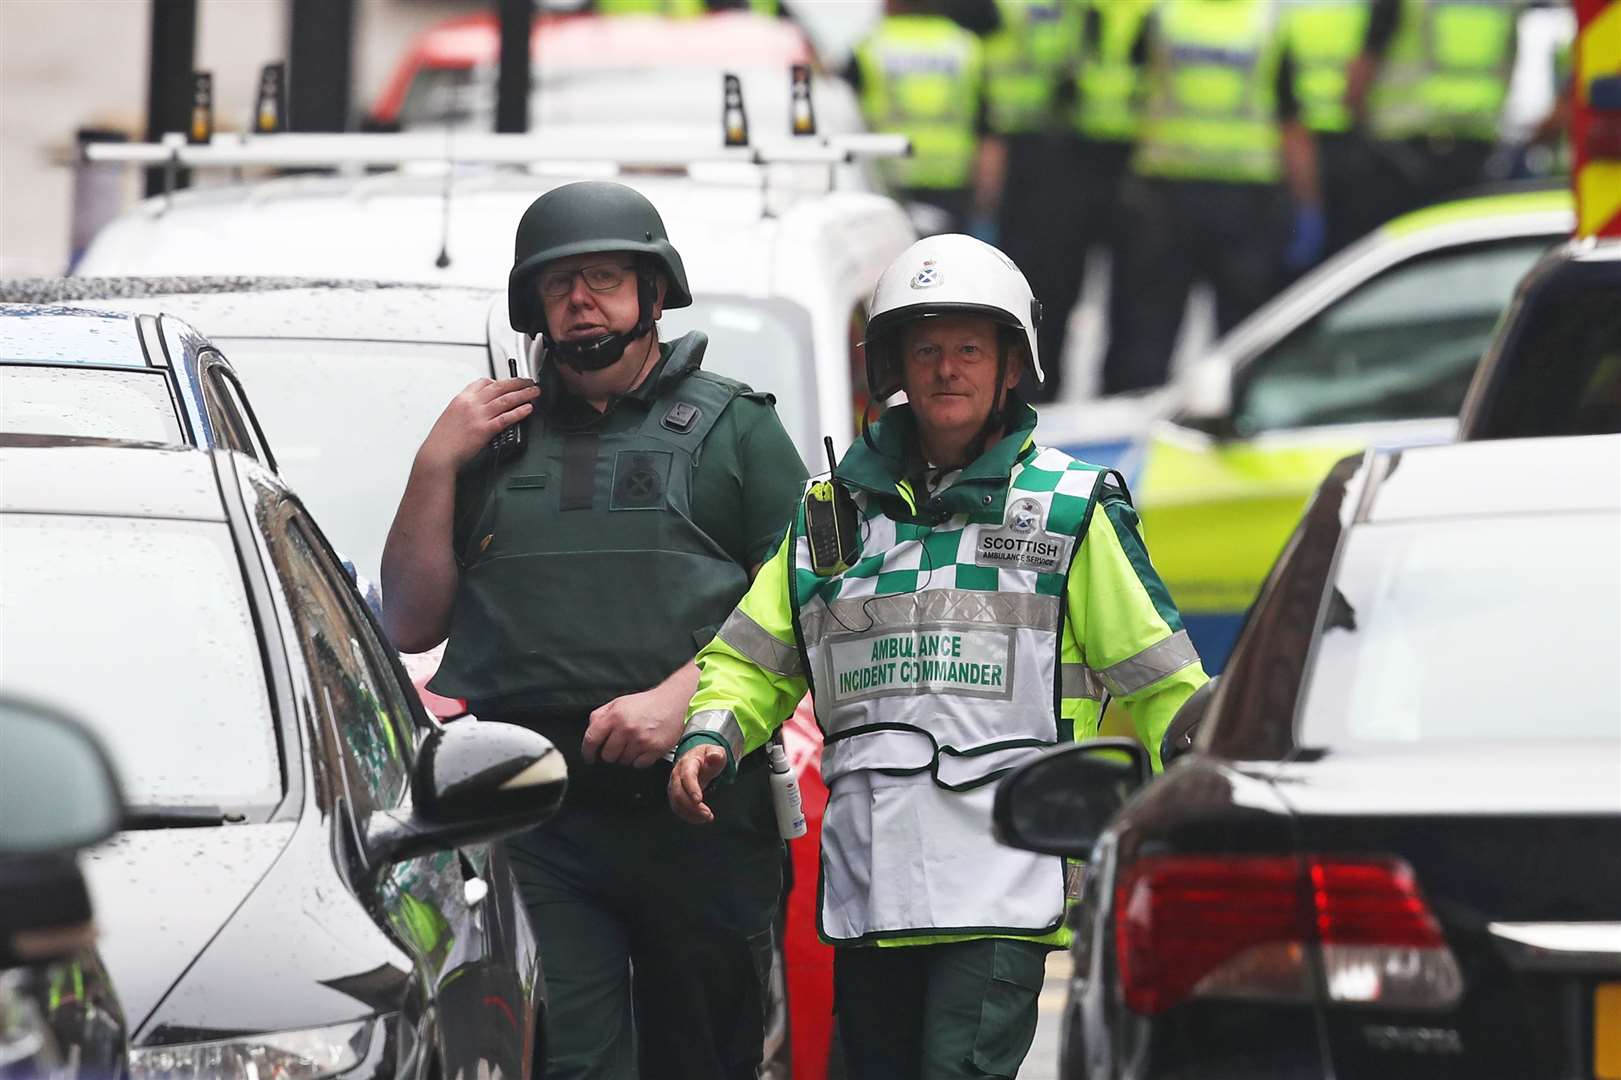 Members of the emergency services at the scene of the attack (Andrew Milligan/PA)